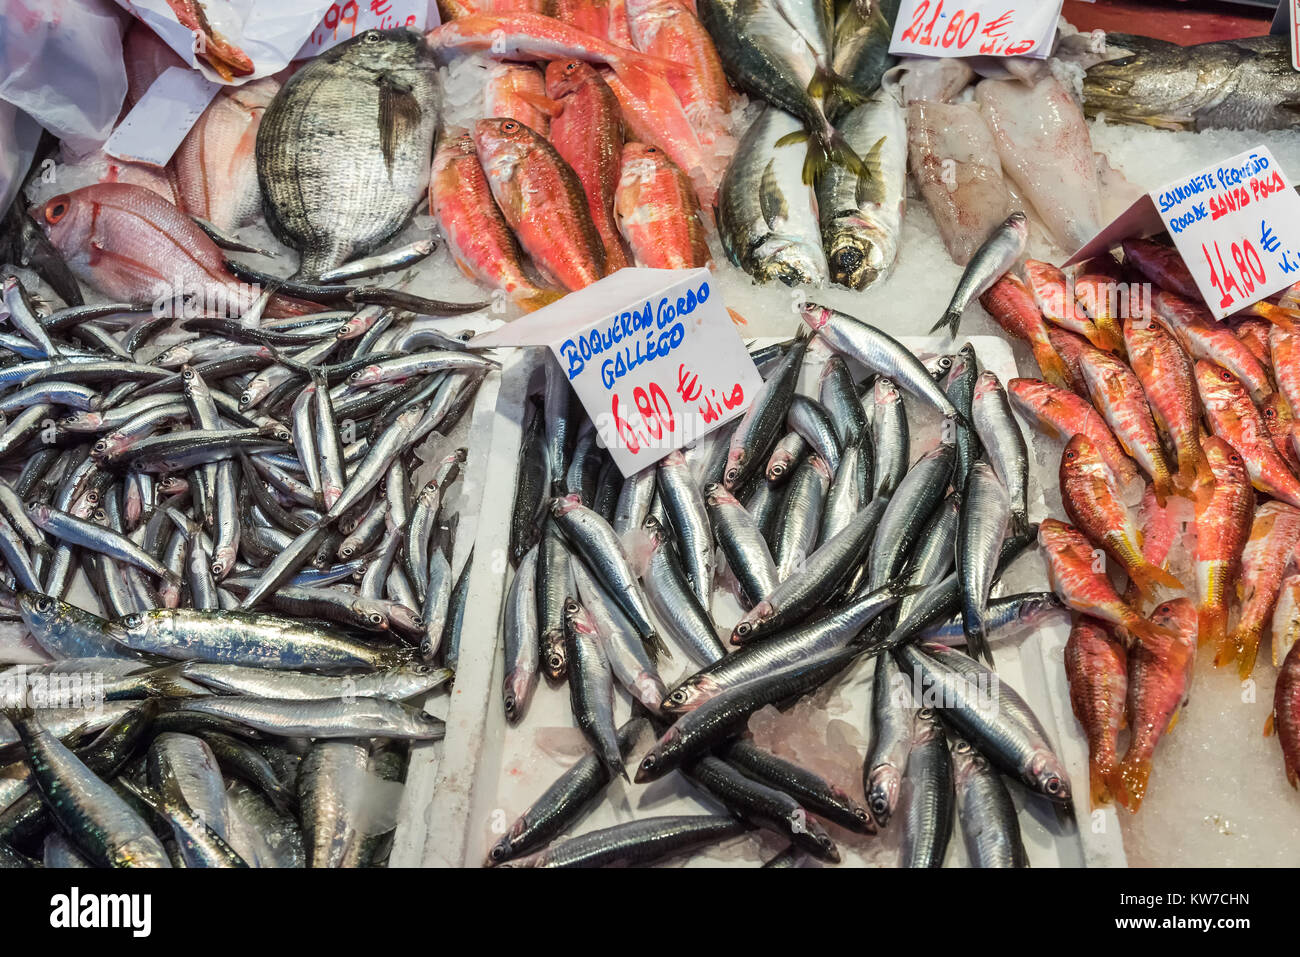 Fresh fish for sale at a market in Madrid, Spain Stock Photo